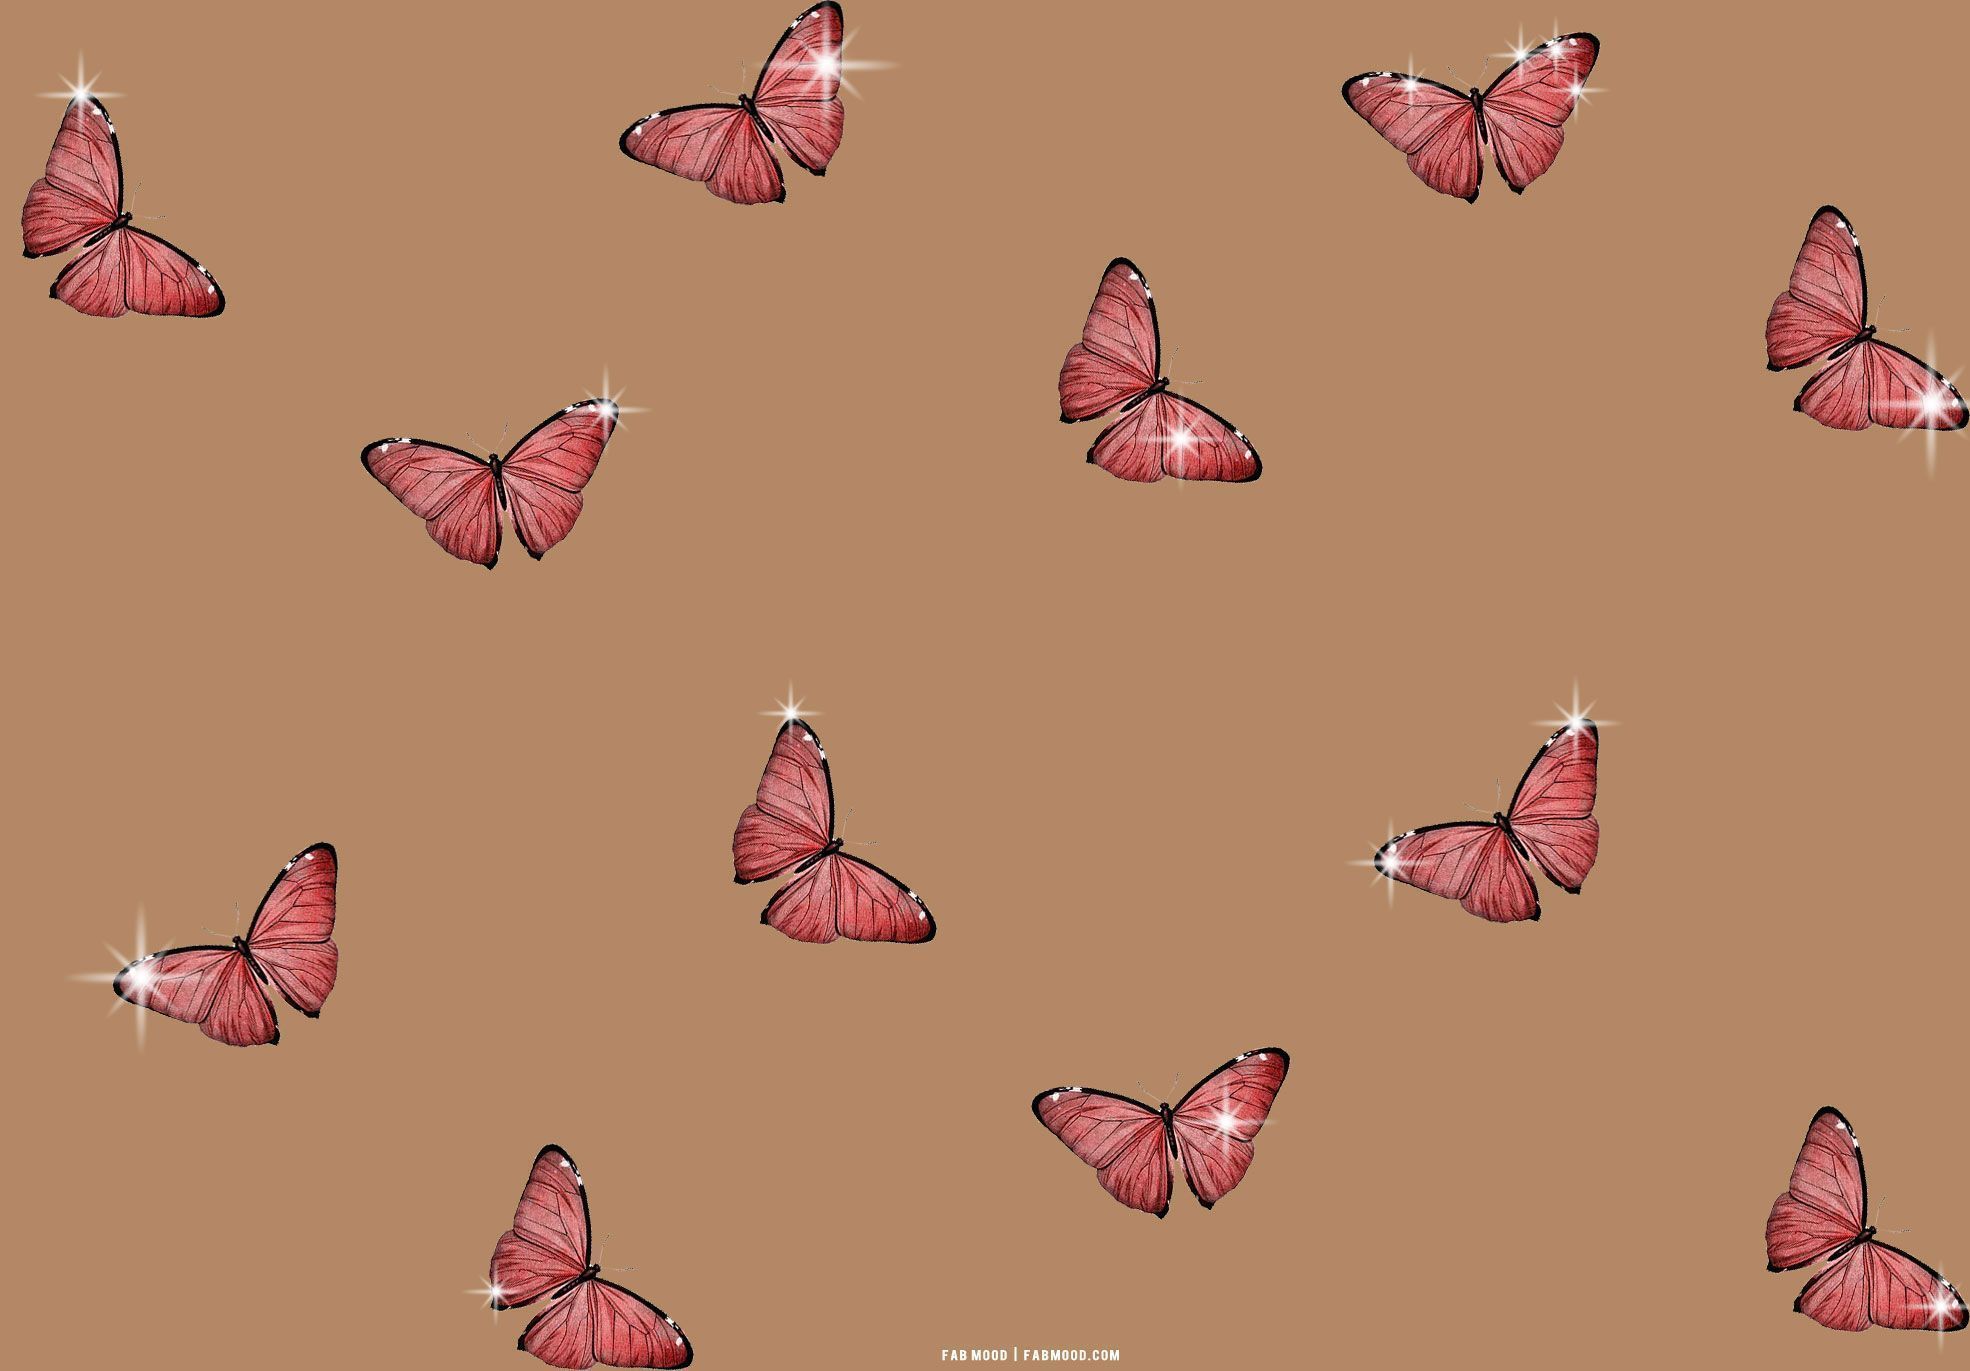 Pink butterfly wallpaper aesthetic for laptop background - Laptop, glitter, coral, butterfly, nails, pattern